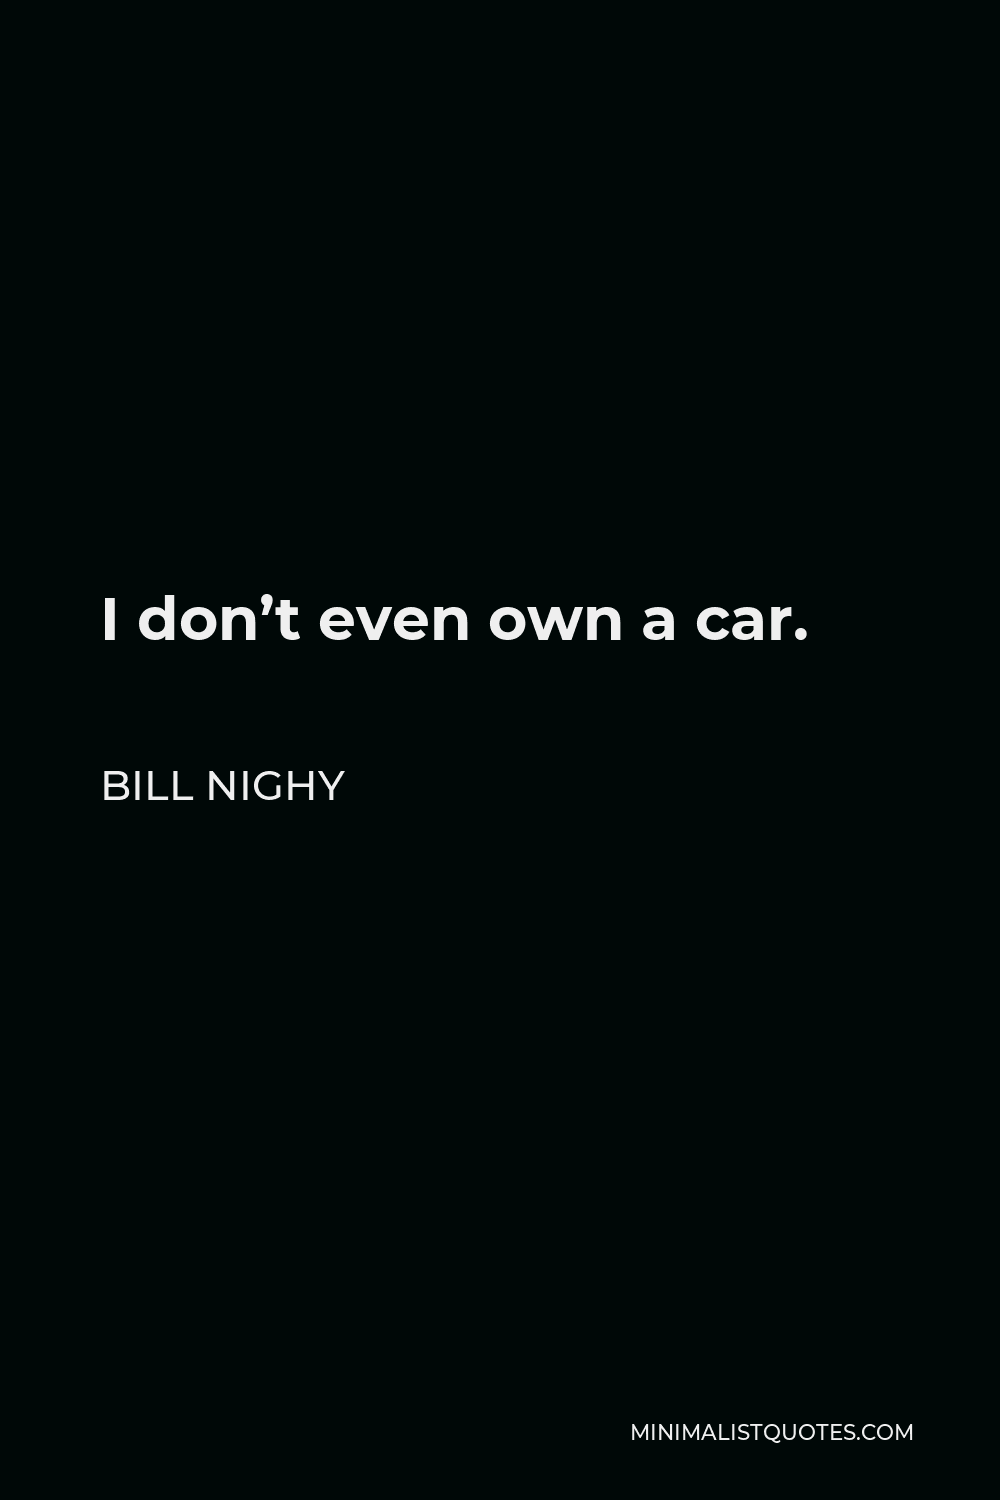 Bill Nighy Quote - I don’t even own a car.